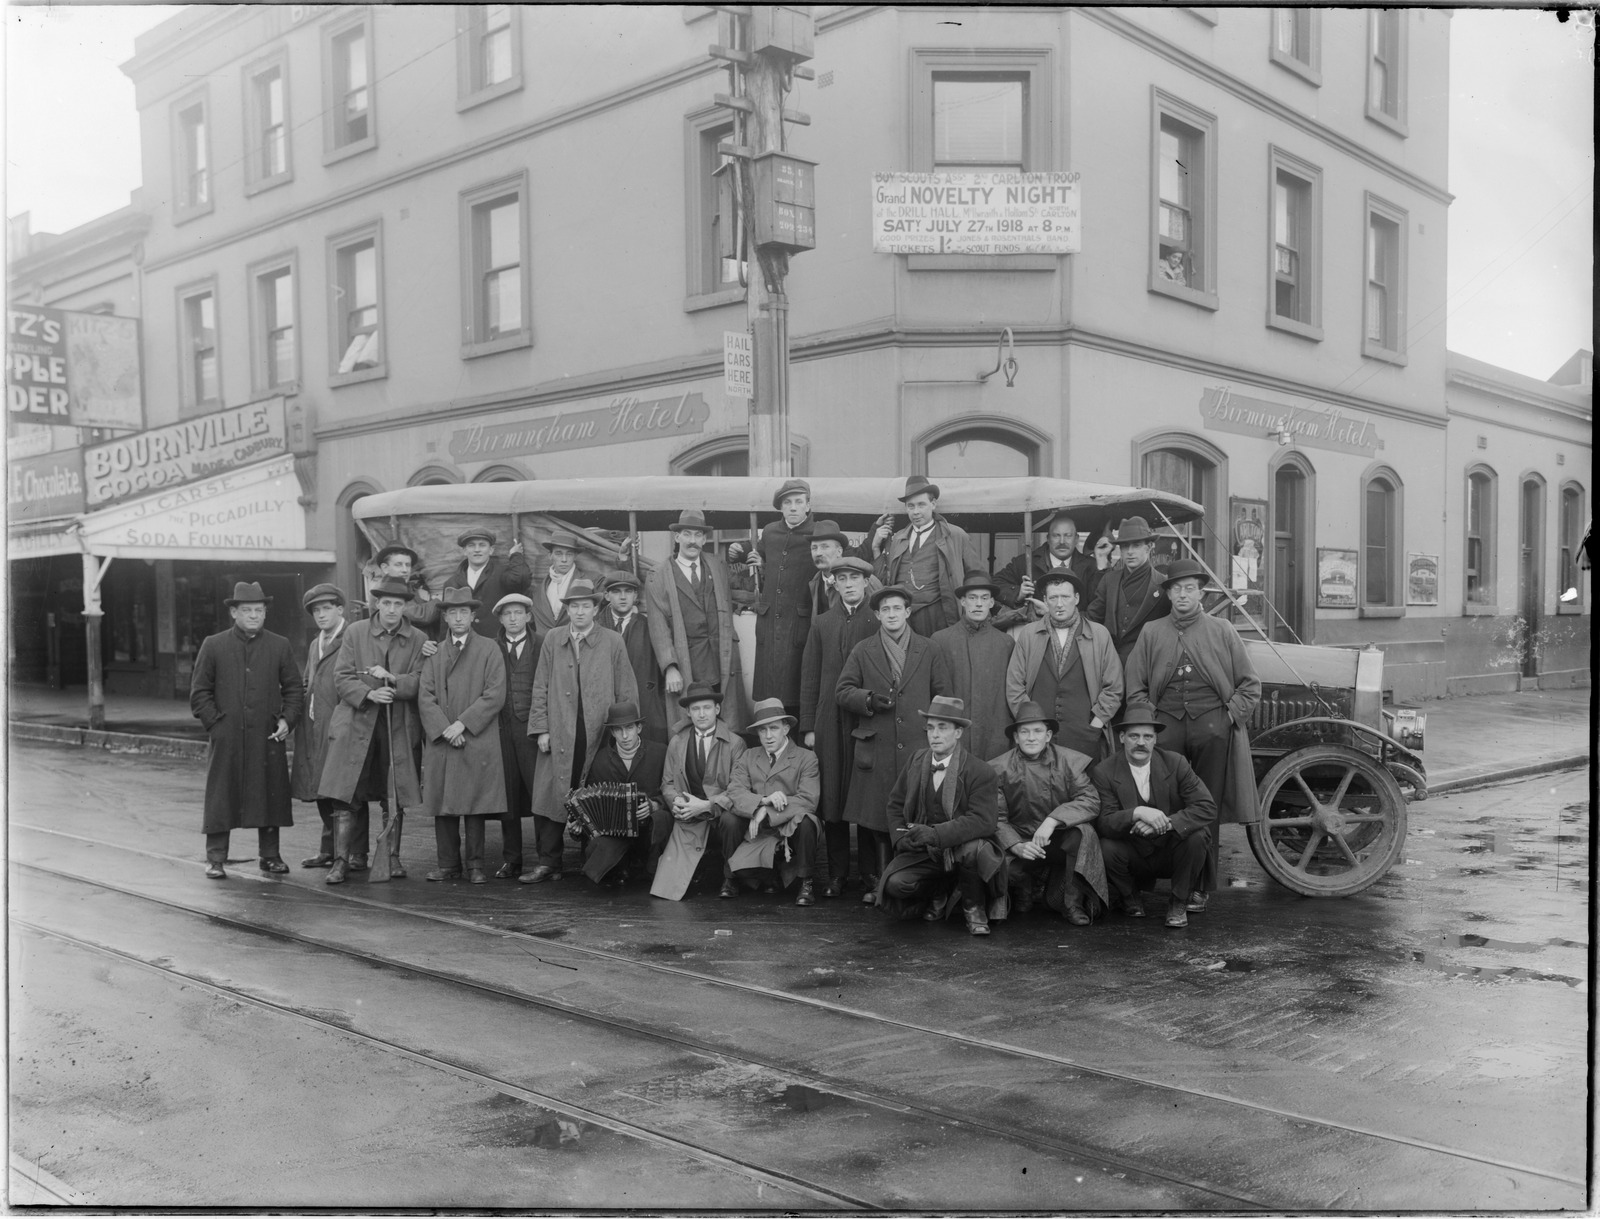 Group of male performers taking part in a Novelty Night, pictured outside the Birmingham Hotel, Fitzroy